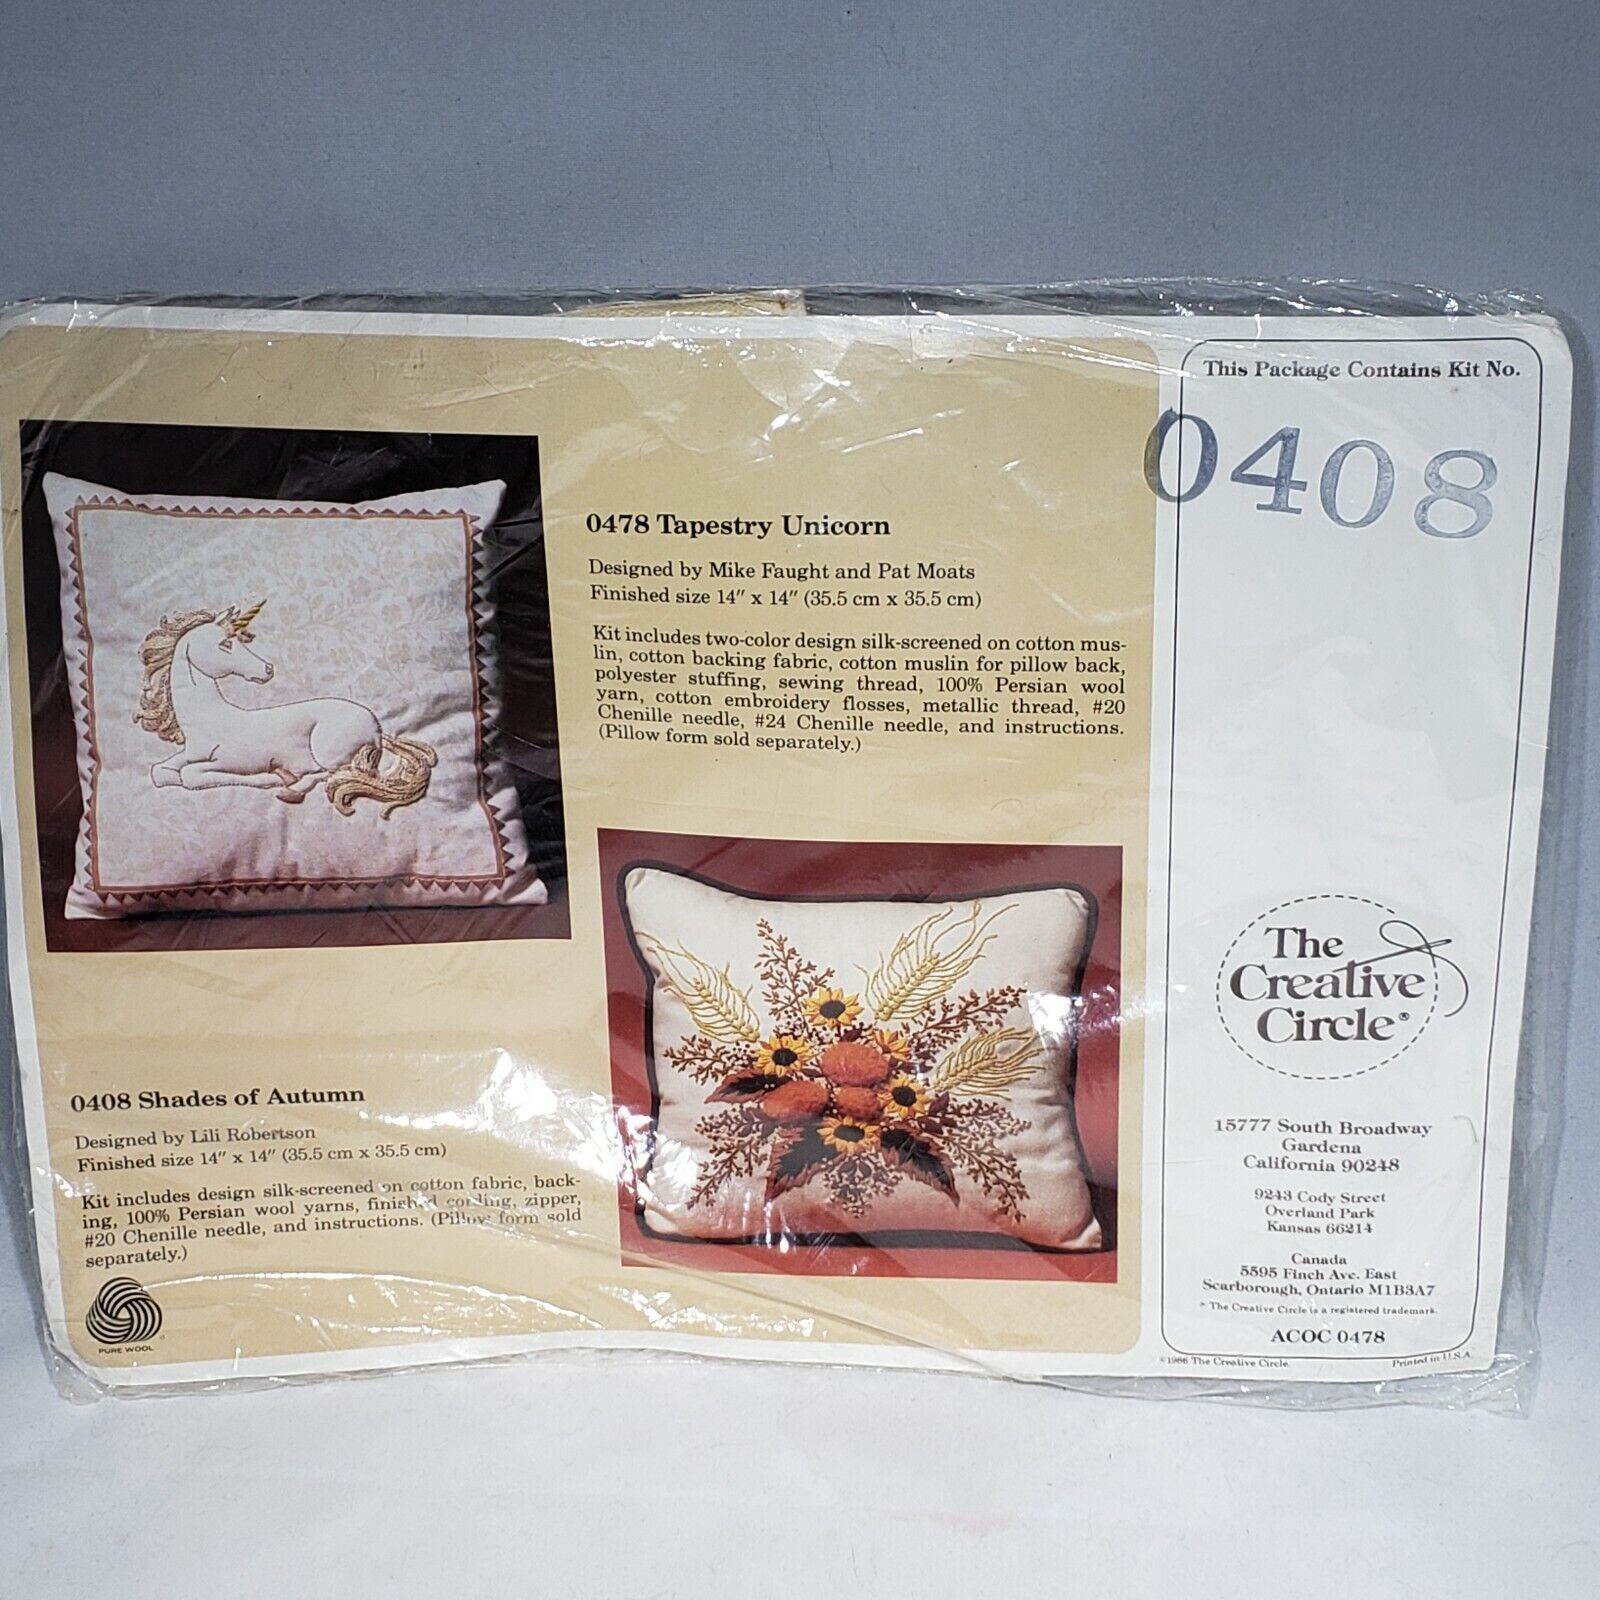 Primary image for VTG 1986 Creative Circle Shades of Autumn Pillow Cover Stitchery Kit 408 Sealed